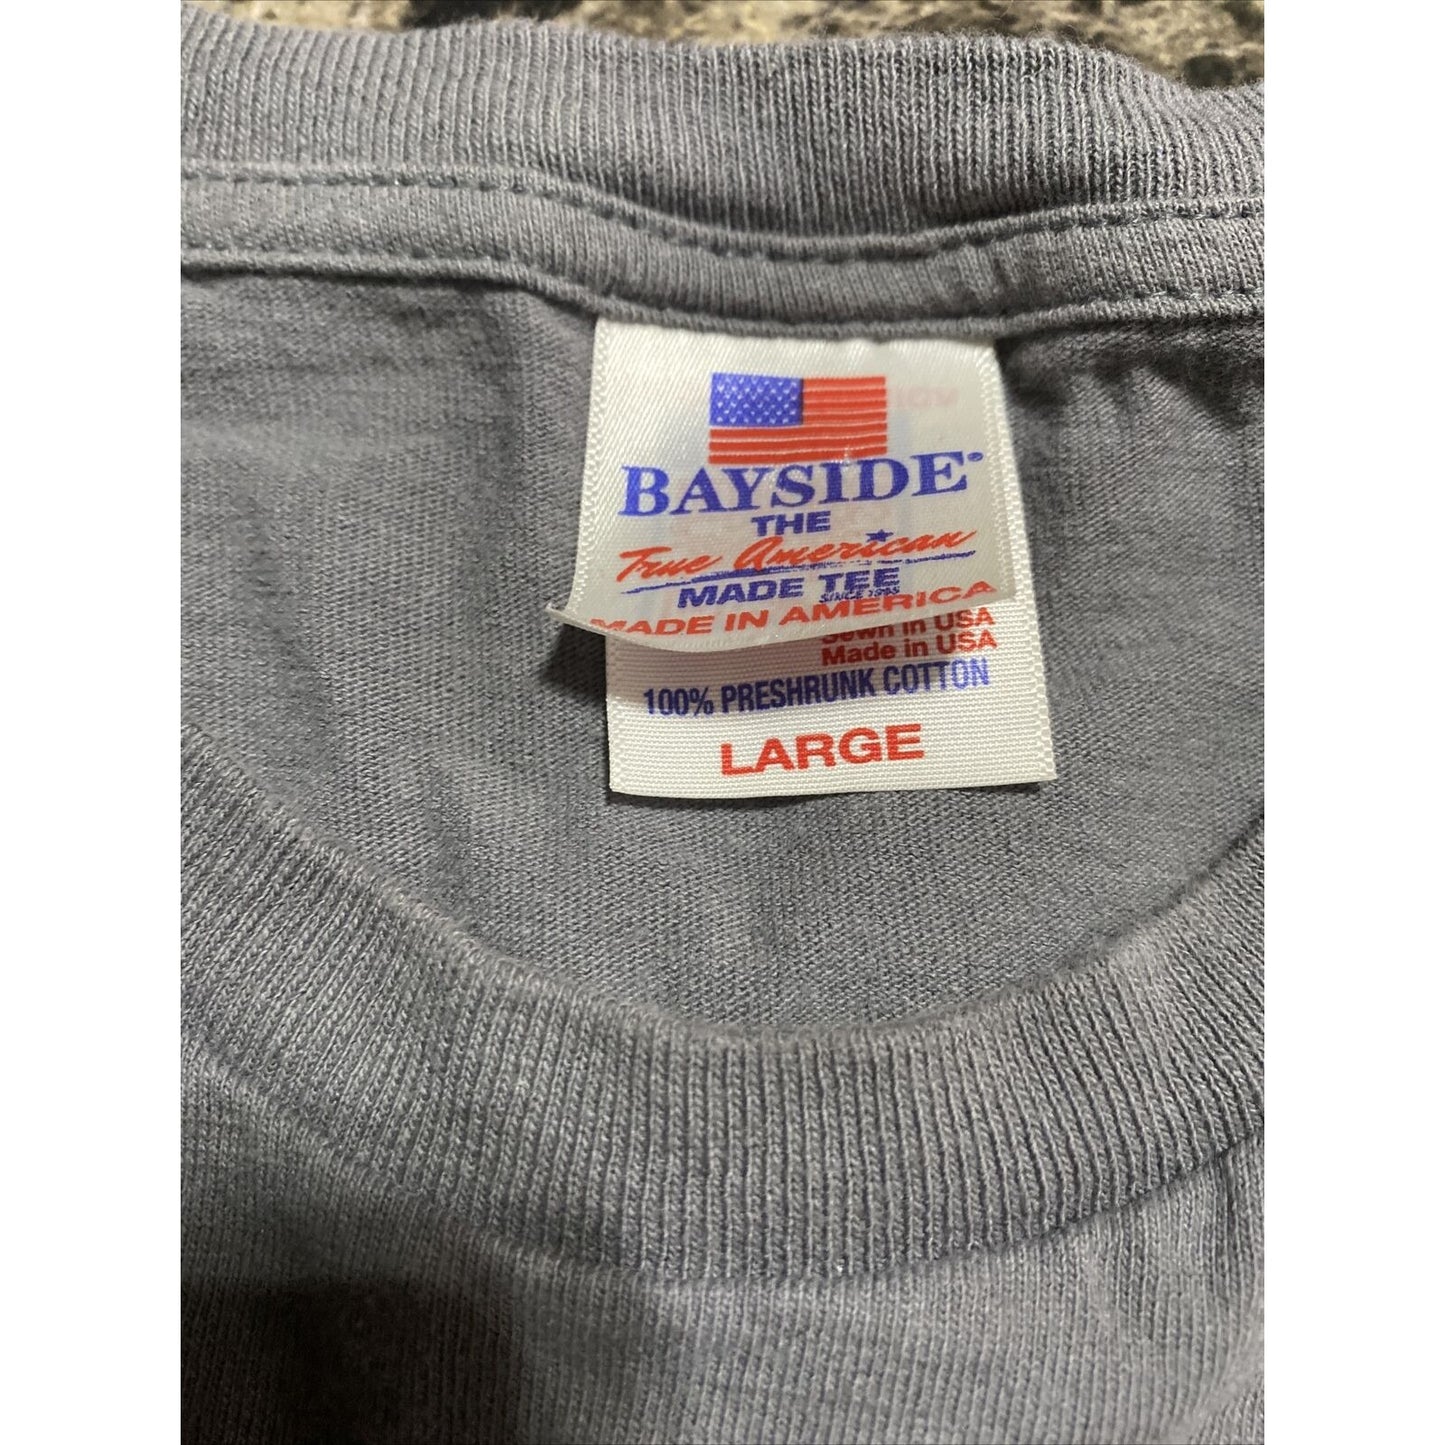 Bayside True American “Never Apologize for Being American” Gray Patriotic Shirt